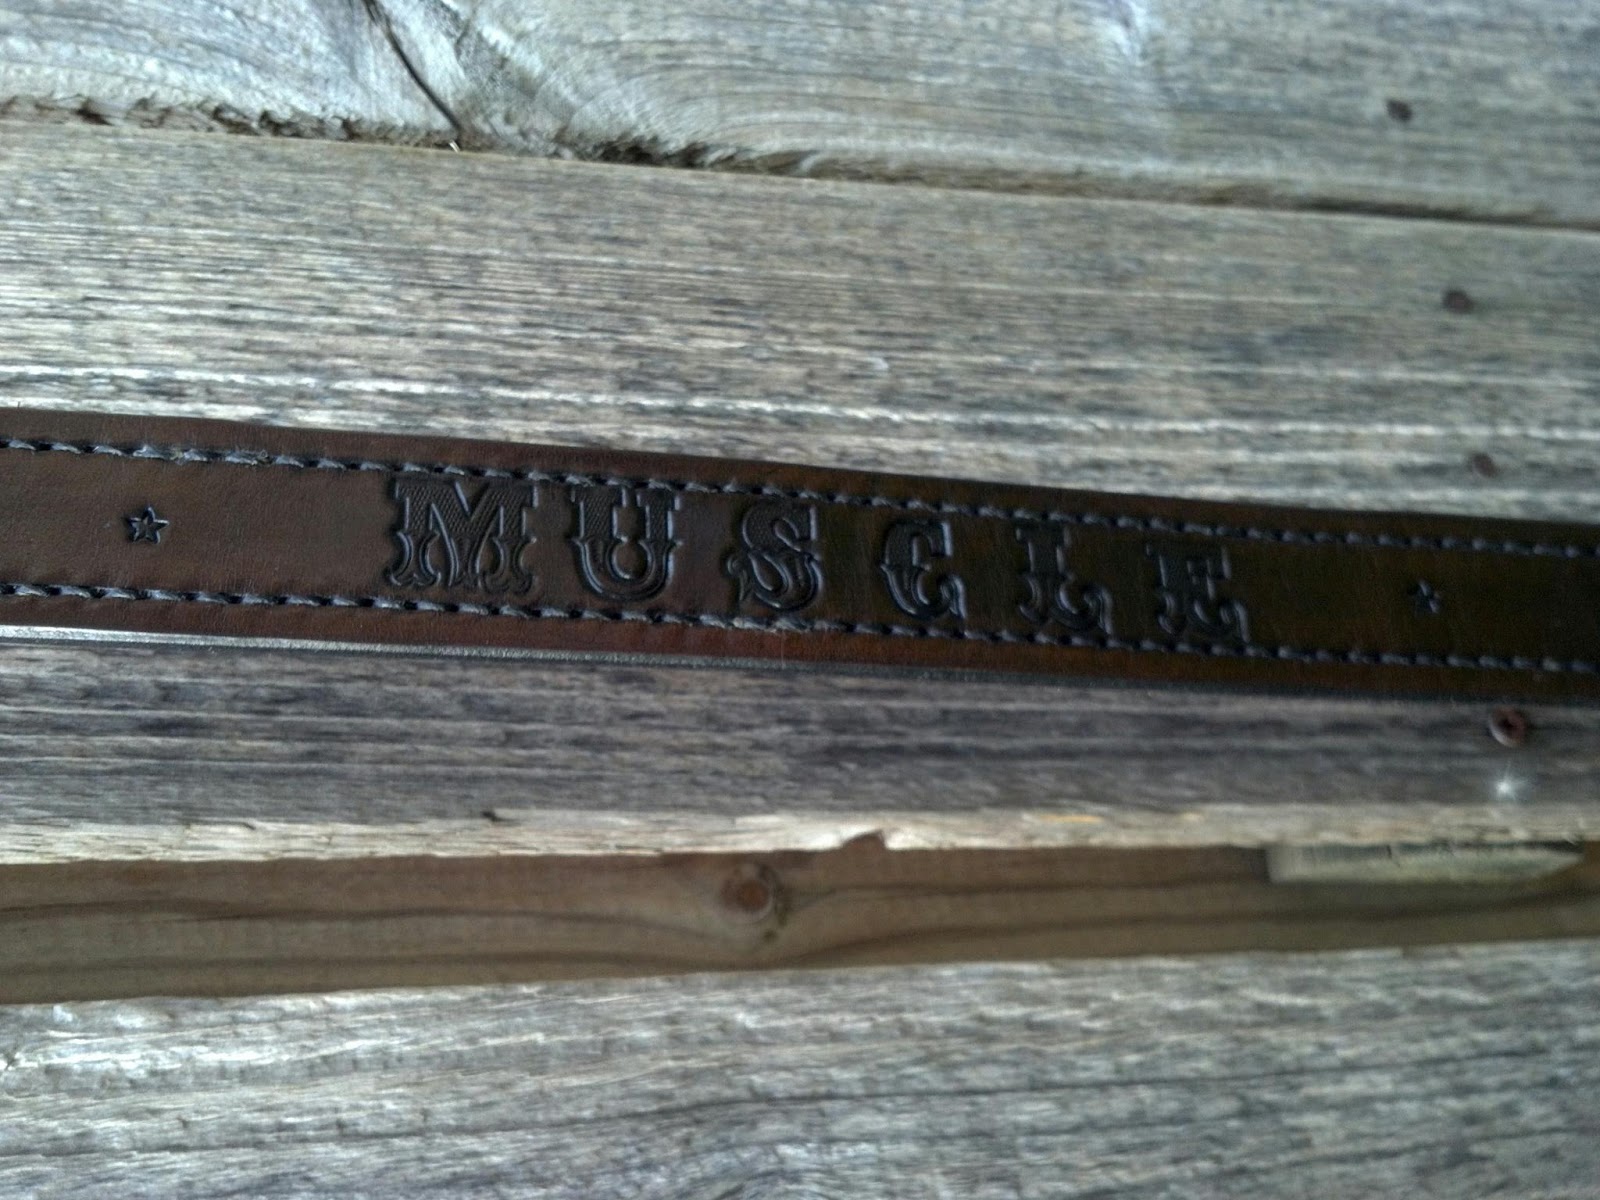 Belts: Saddle stitched by hand